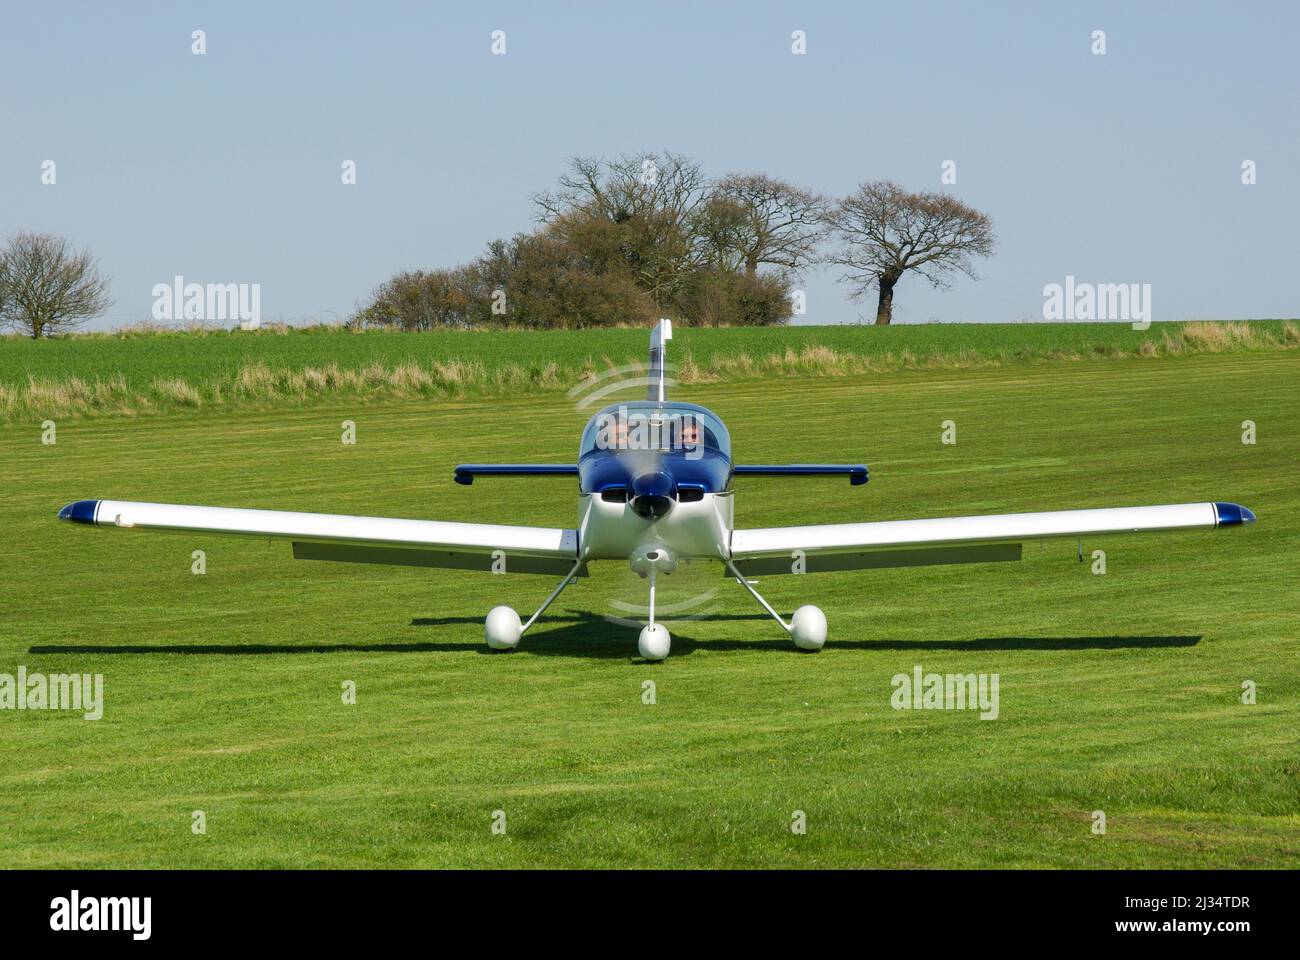 Van's RV-9A light aircraft plane G-GNRV taxiing on the grass airstrip for the air race at Great Oakley, UK. Rural airfield among farmland in Essex Stock Photo